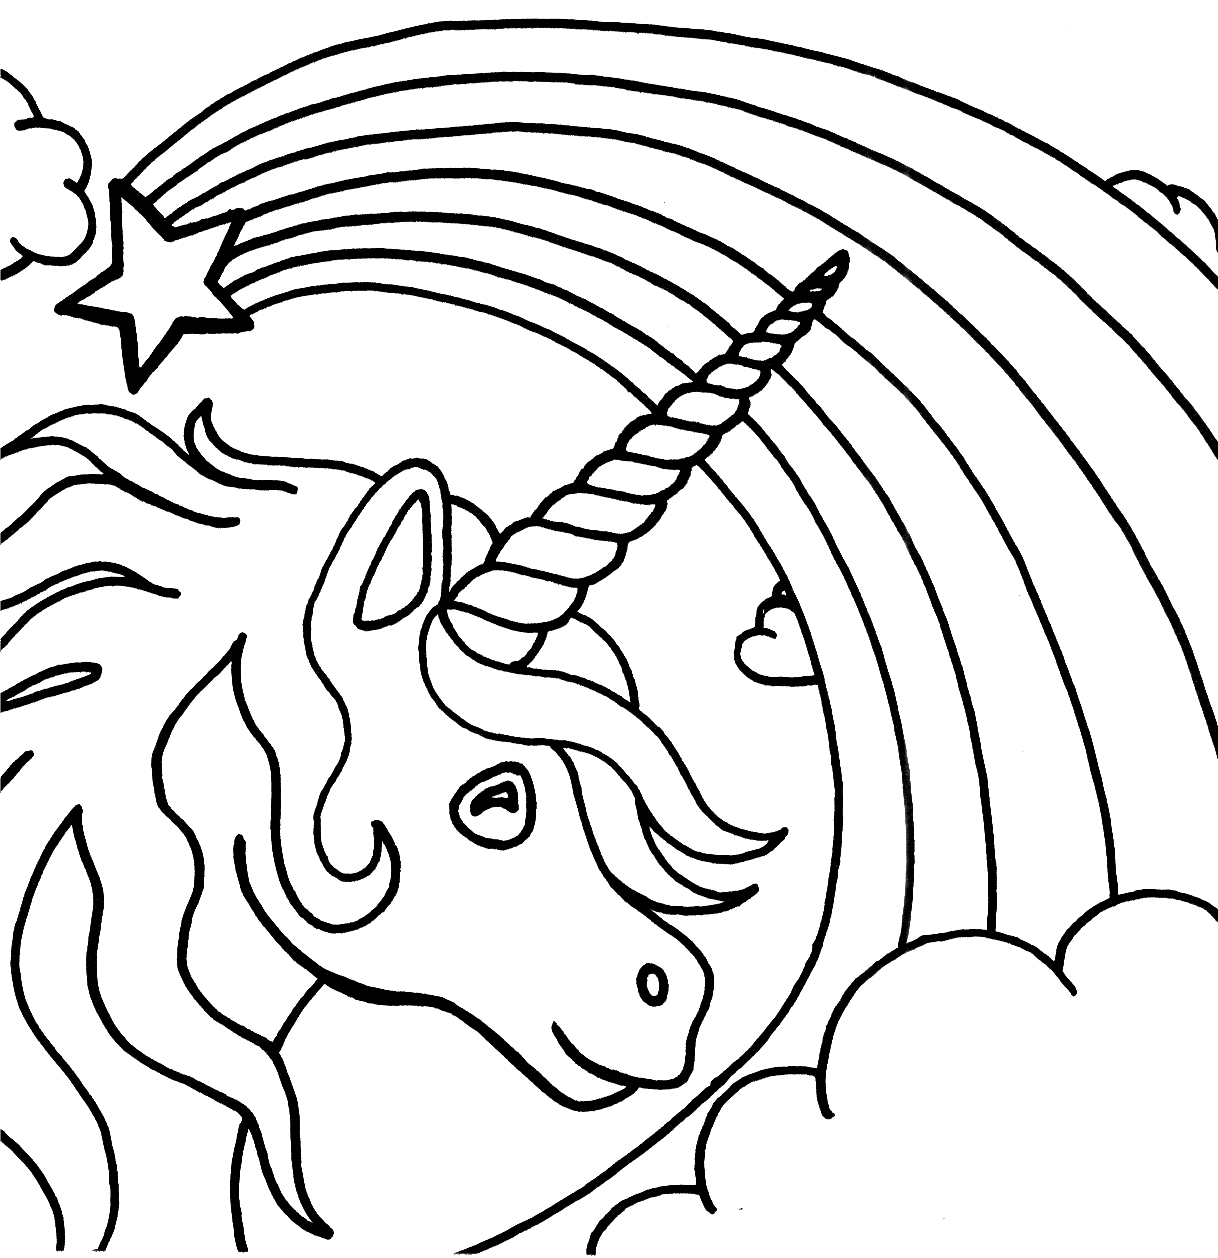 rainbows coloring pages